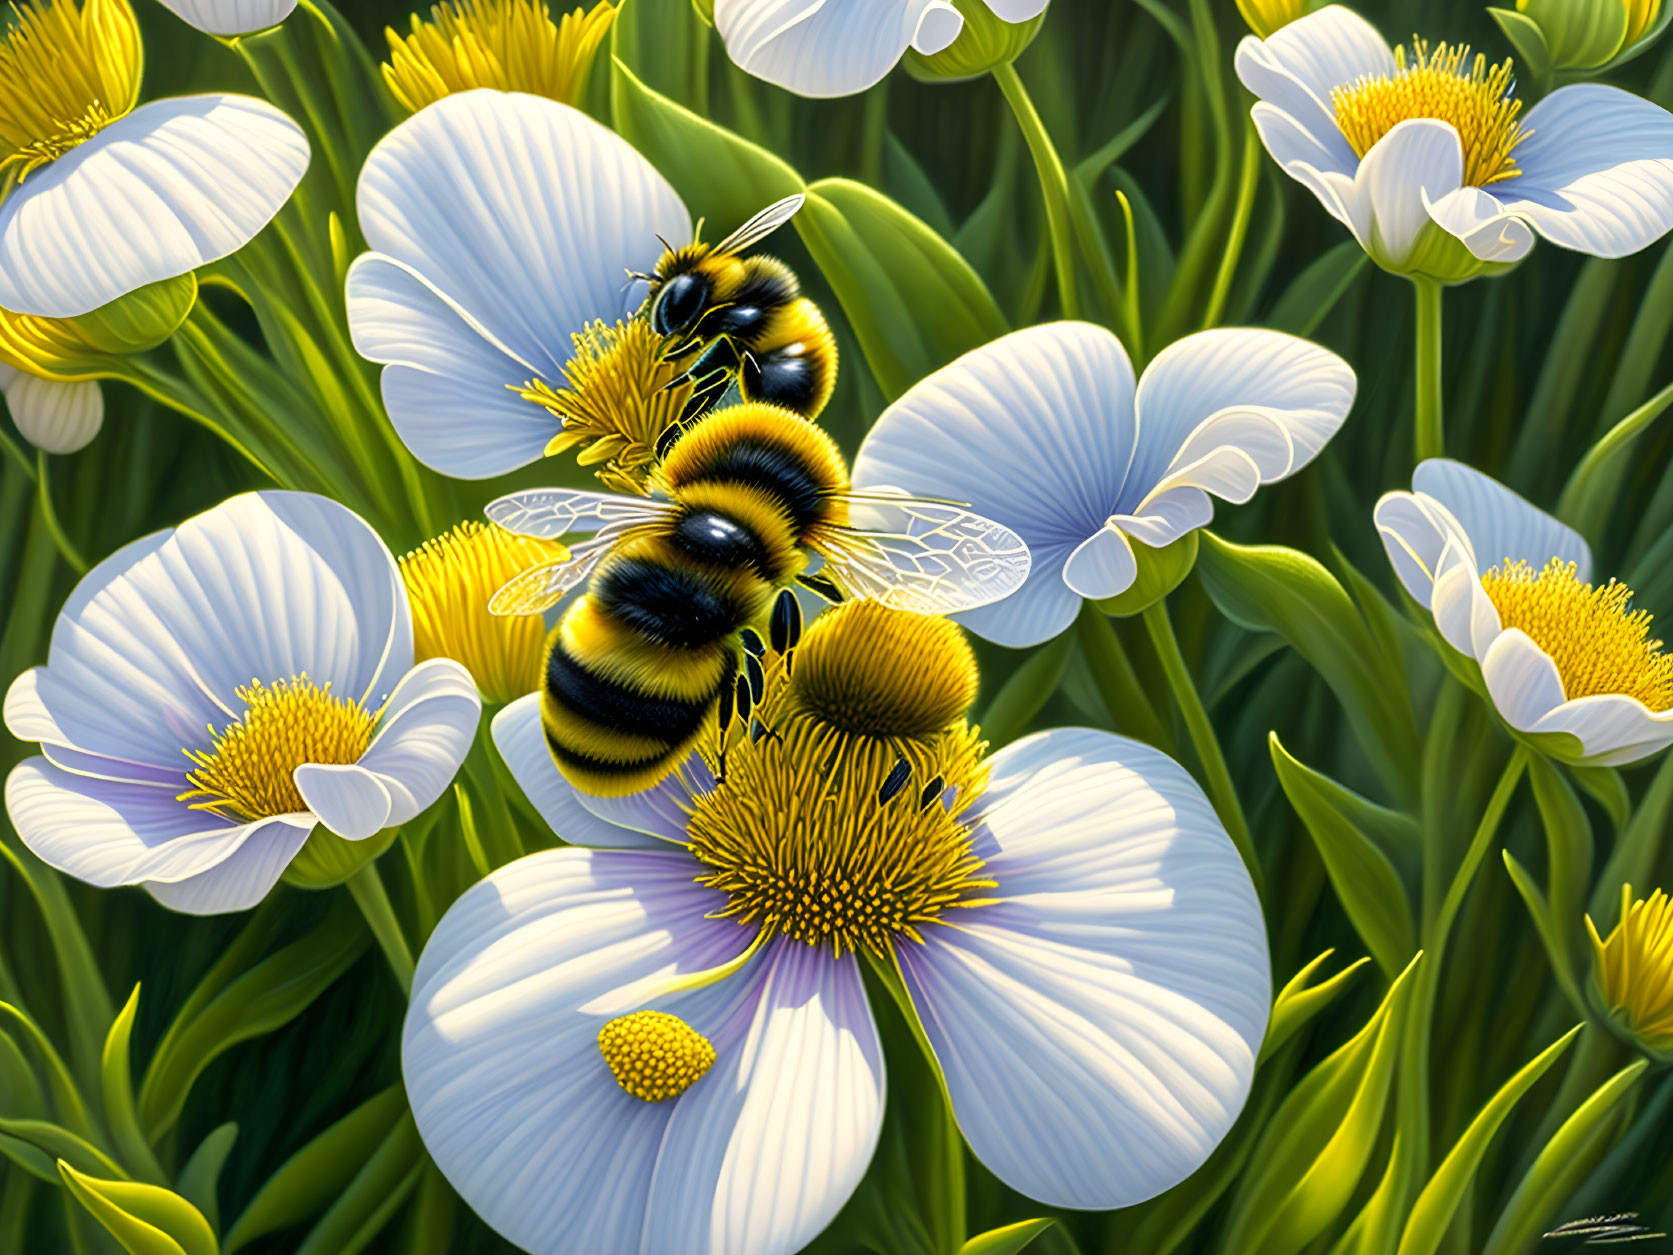 Realistic painting of bees on white and yellow flowers with fine details in green foliage